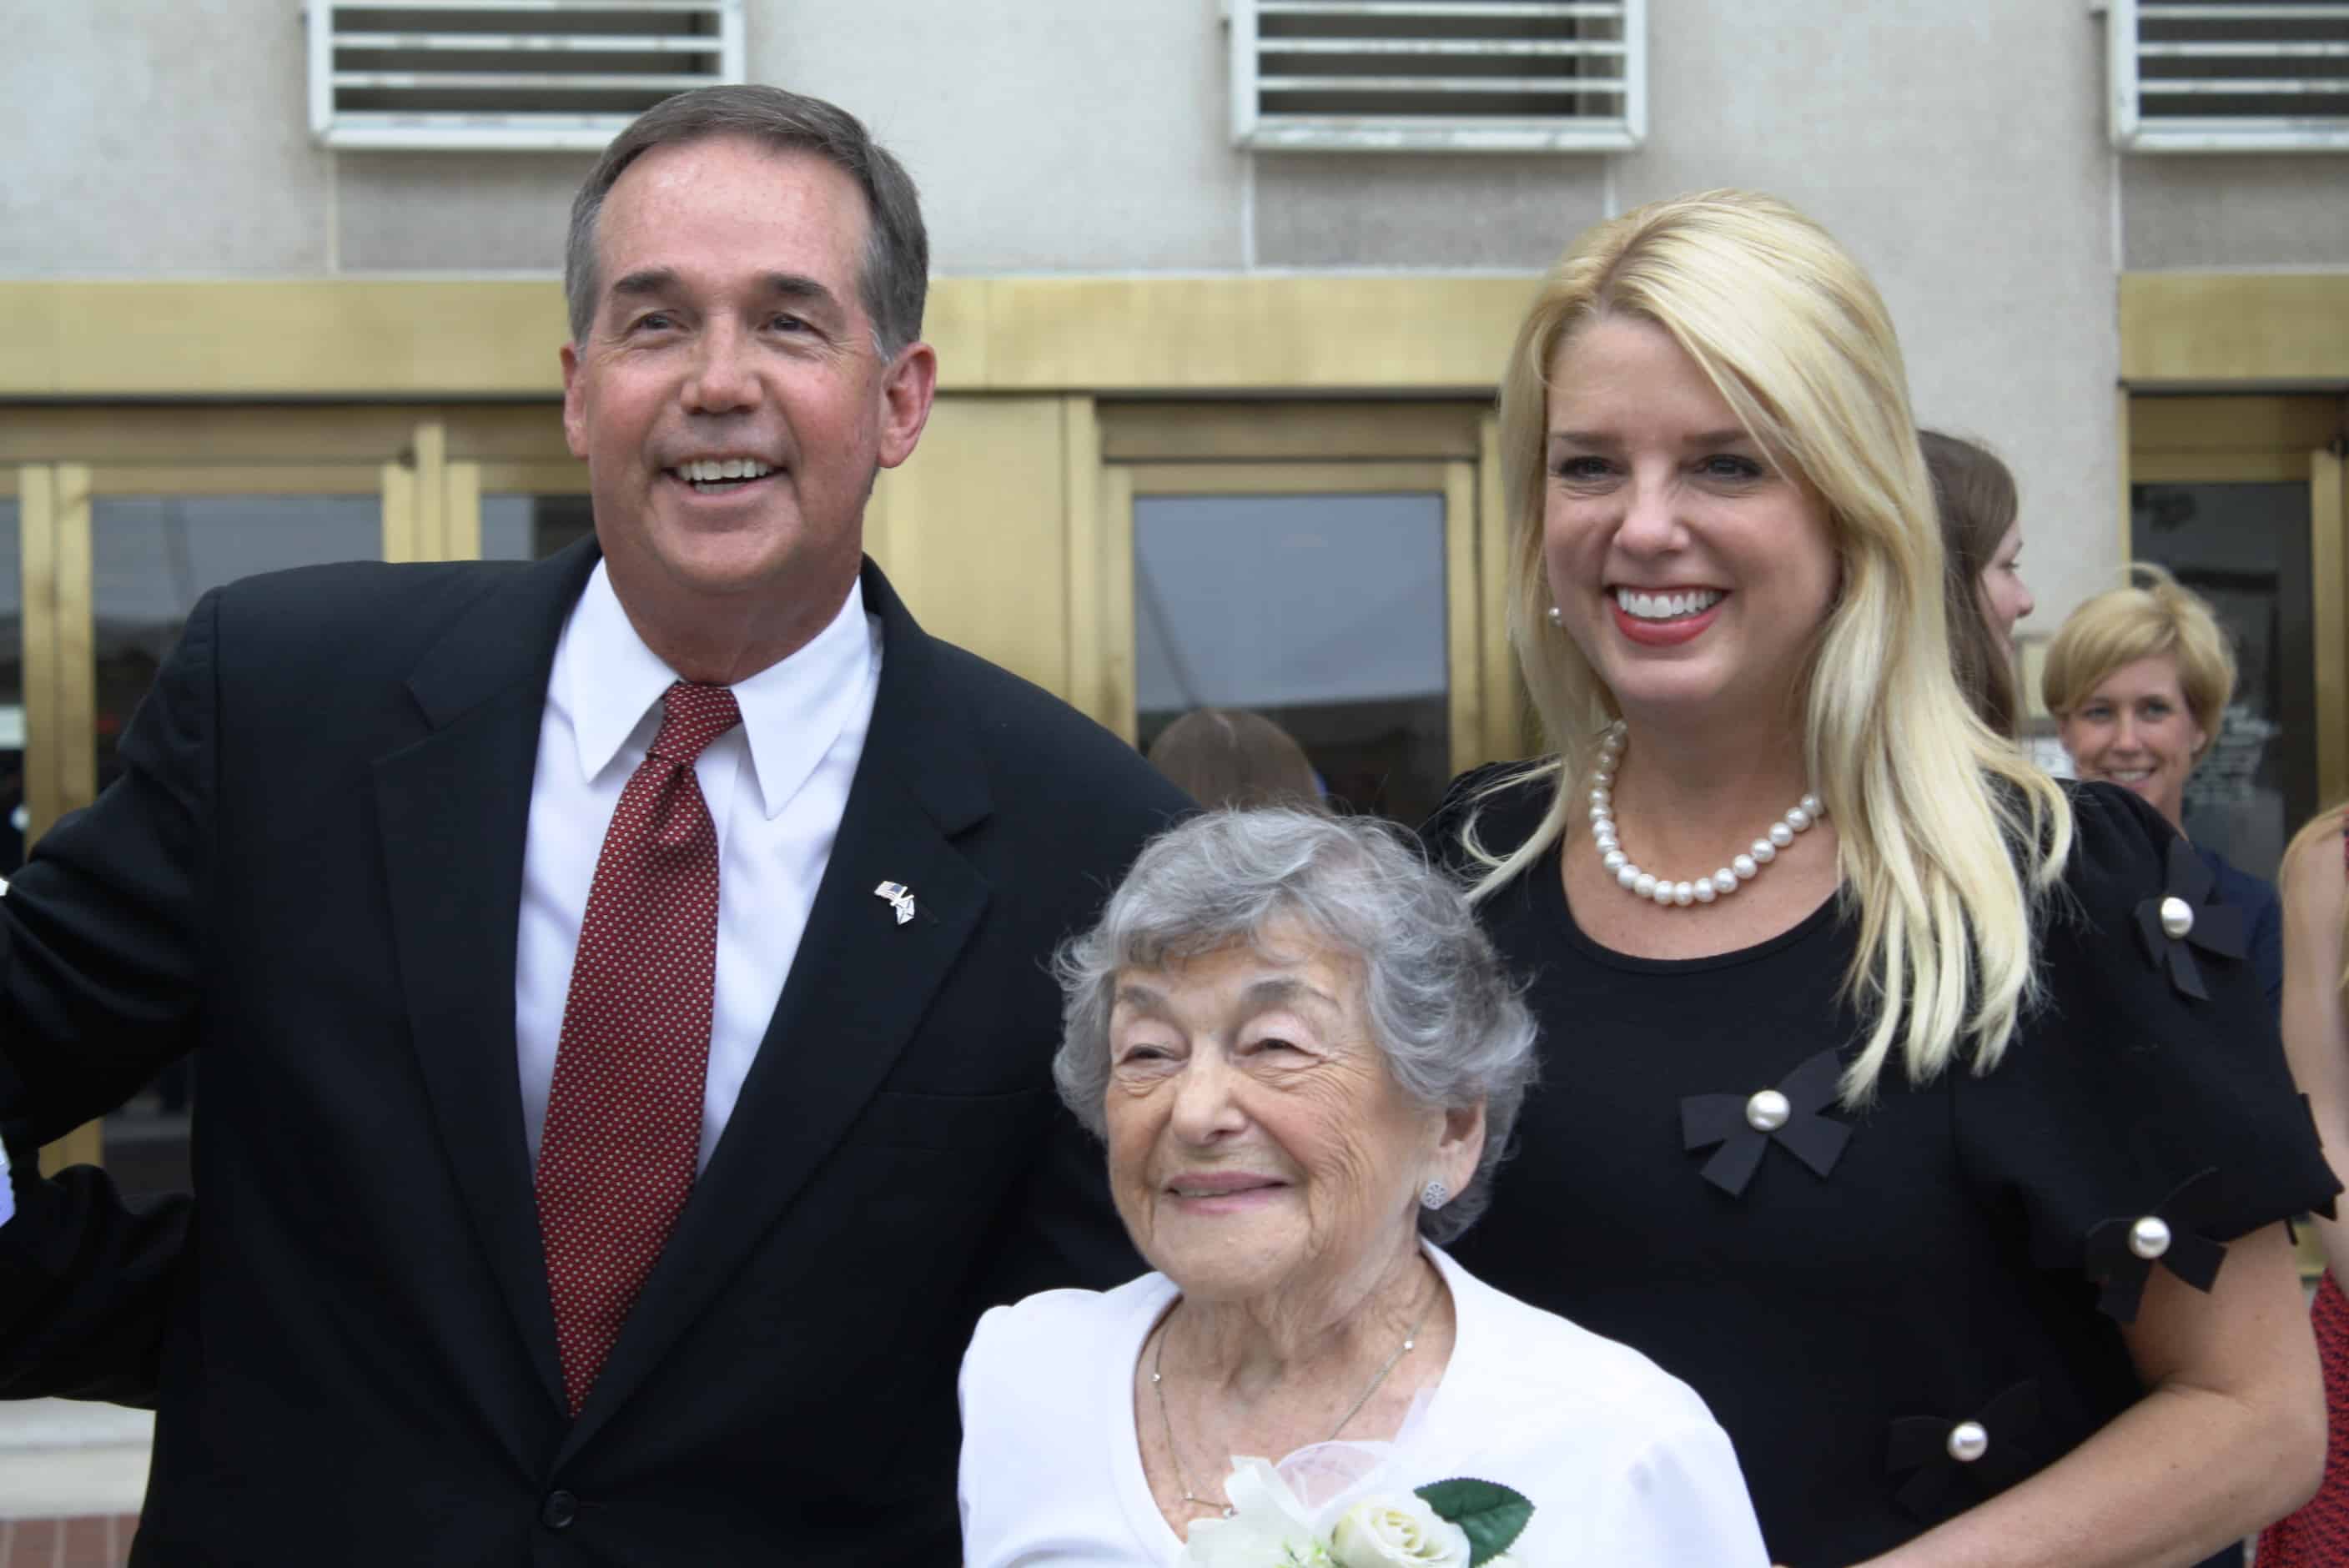 Florida Attorney General Pam Bondi and Cabinet Members Induct Keiser University Co-founder Evelyn Keiser into Florida Women’s Hall of Fame